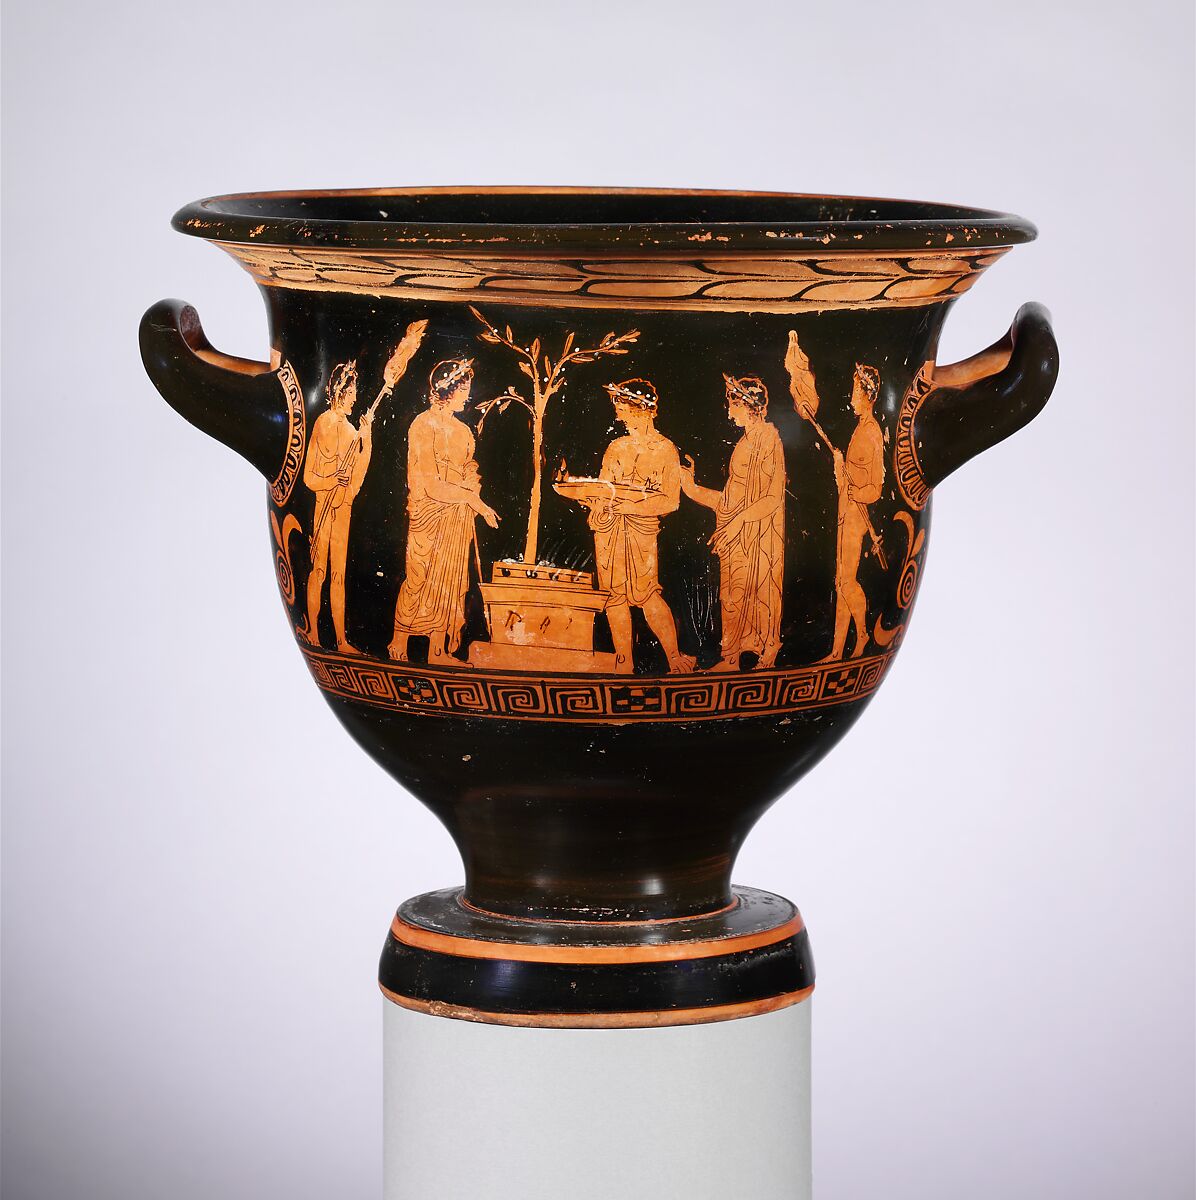 Terracotta bell-krater (bowl for mixing wine and water), Attributed to the Nikias Painter, Terracotta, Greek, Attic 